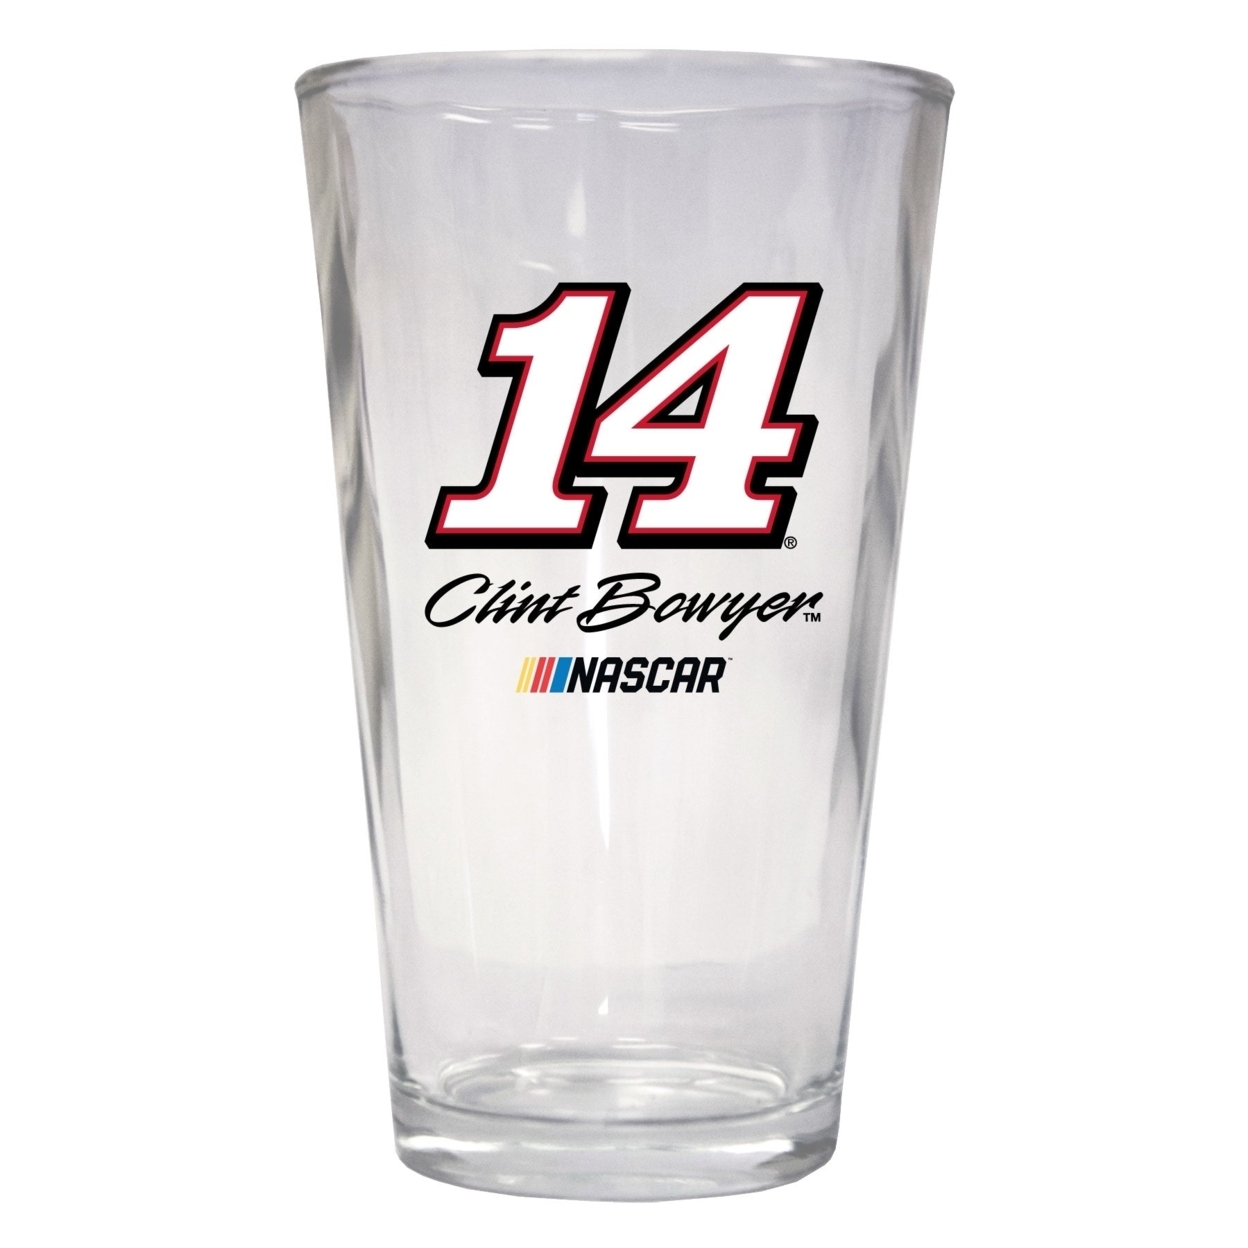 Clint Bowyer #14 NASCAR Pint Glass New For 2020